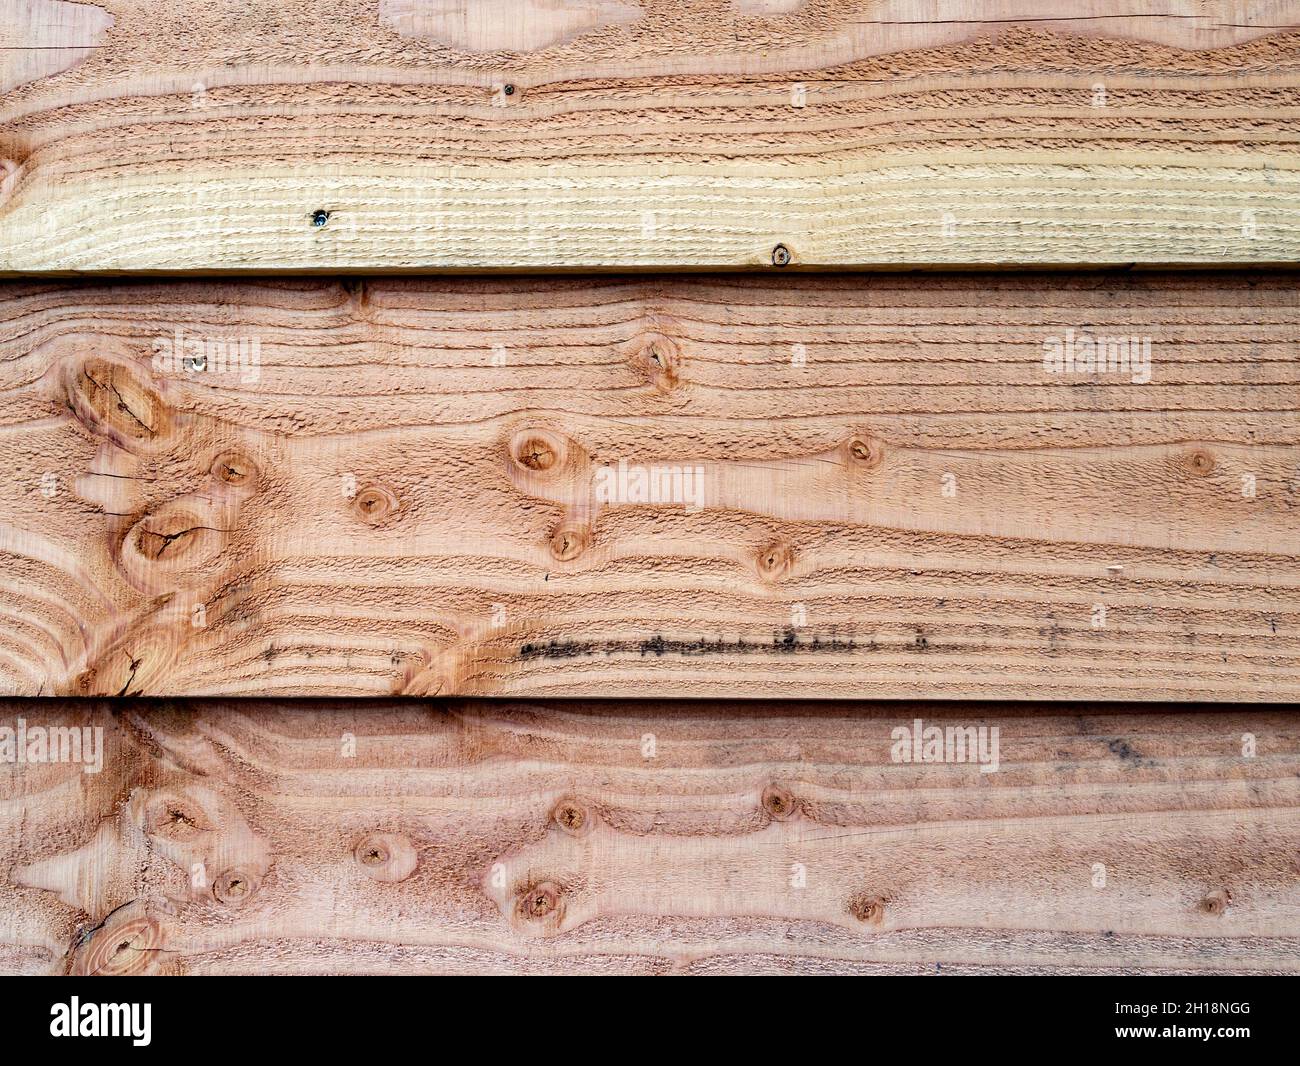 Three recently sawn timber planks from Douglas fir, Pseudotsuga menziesii, tree used for fence of garden Stock Photo